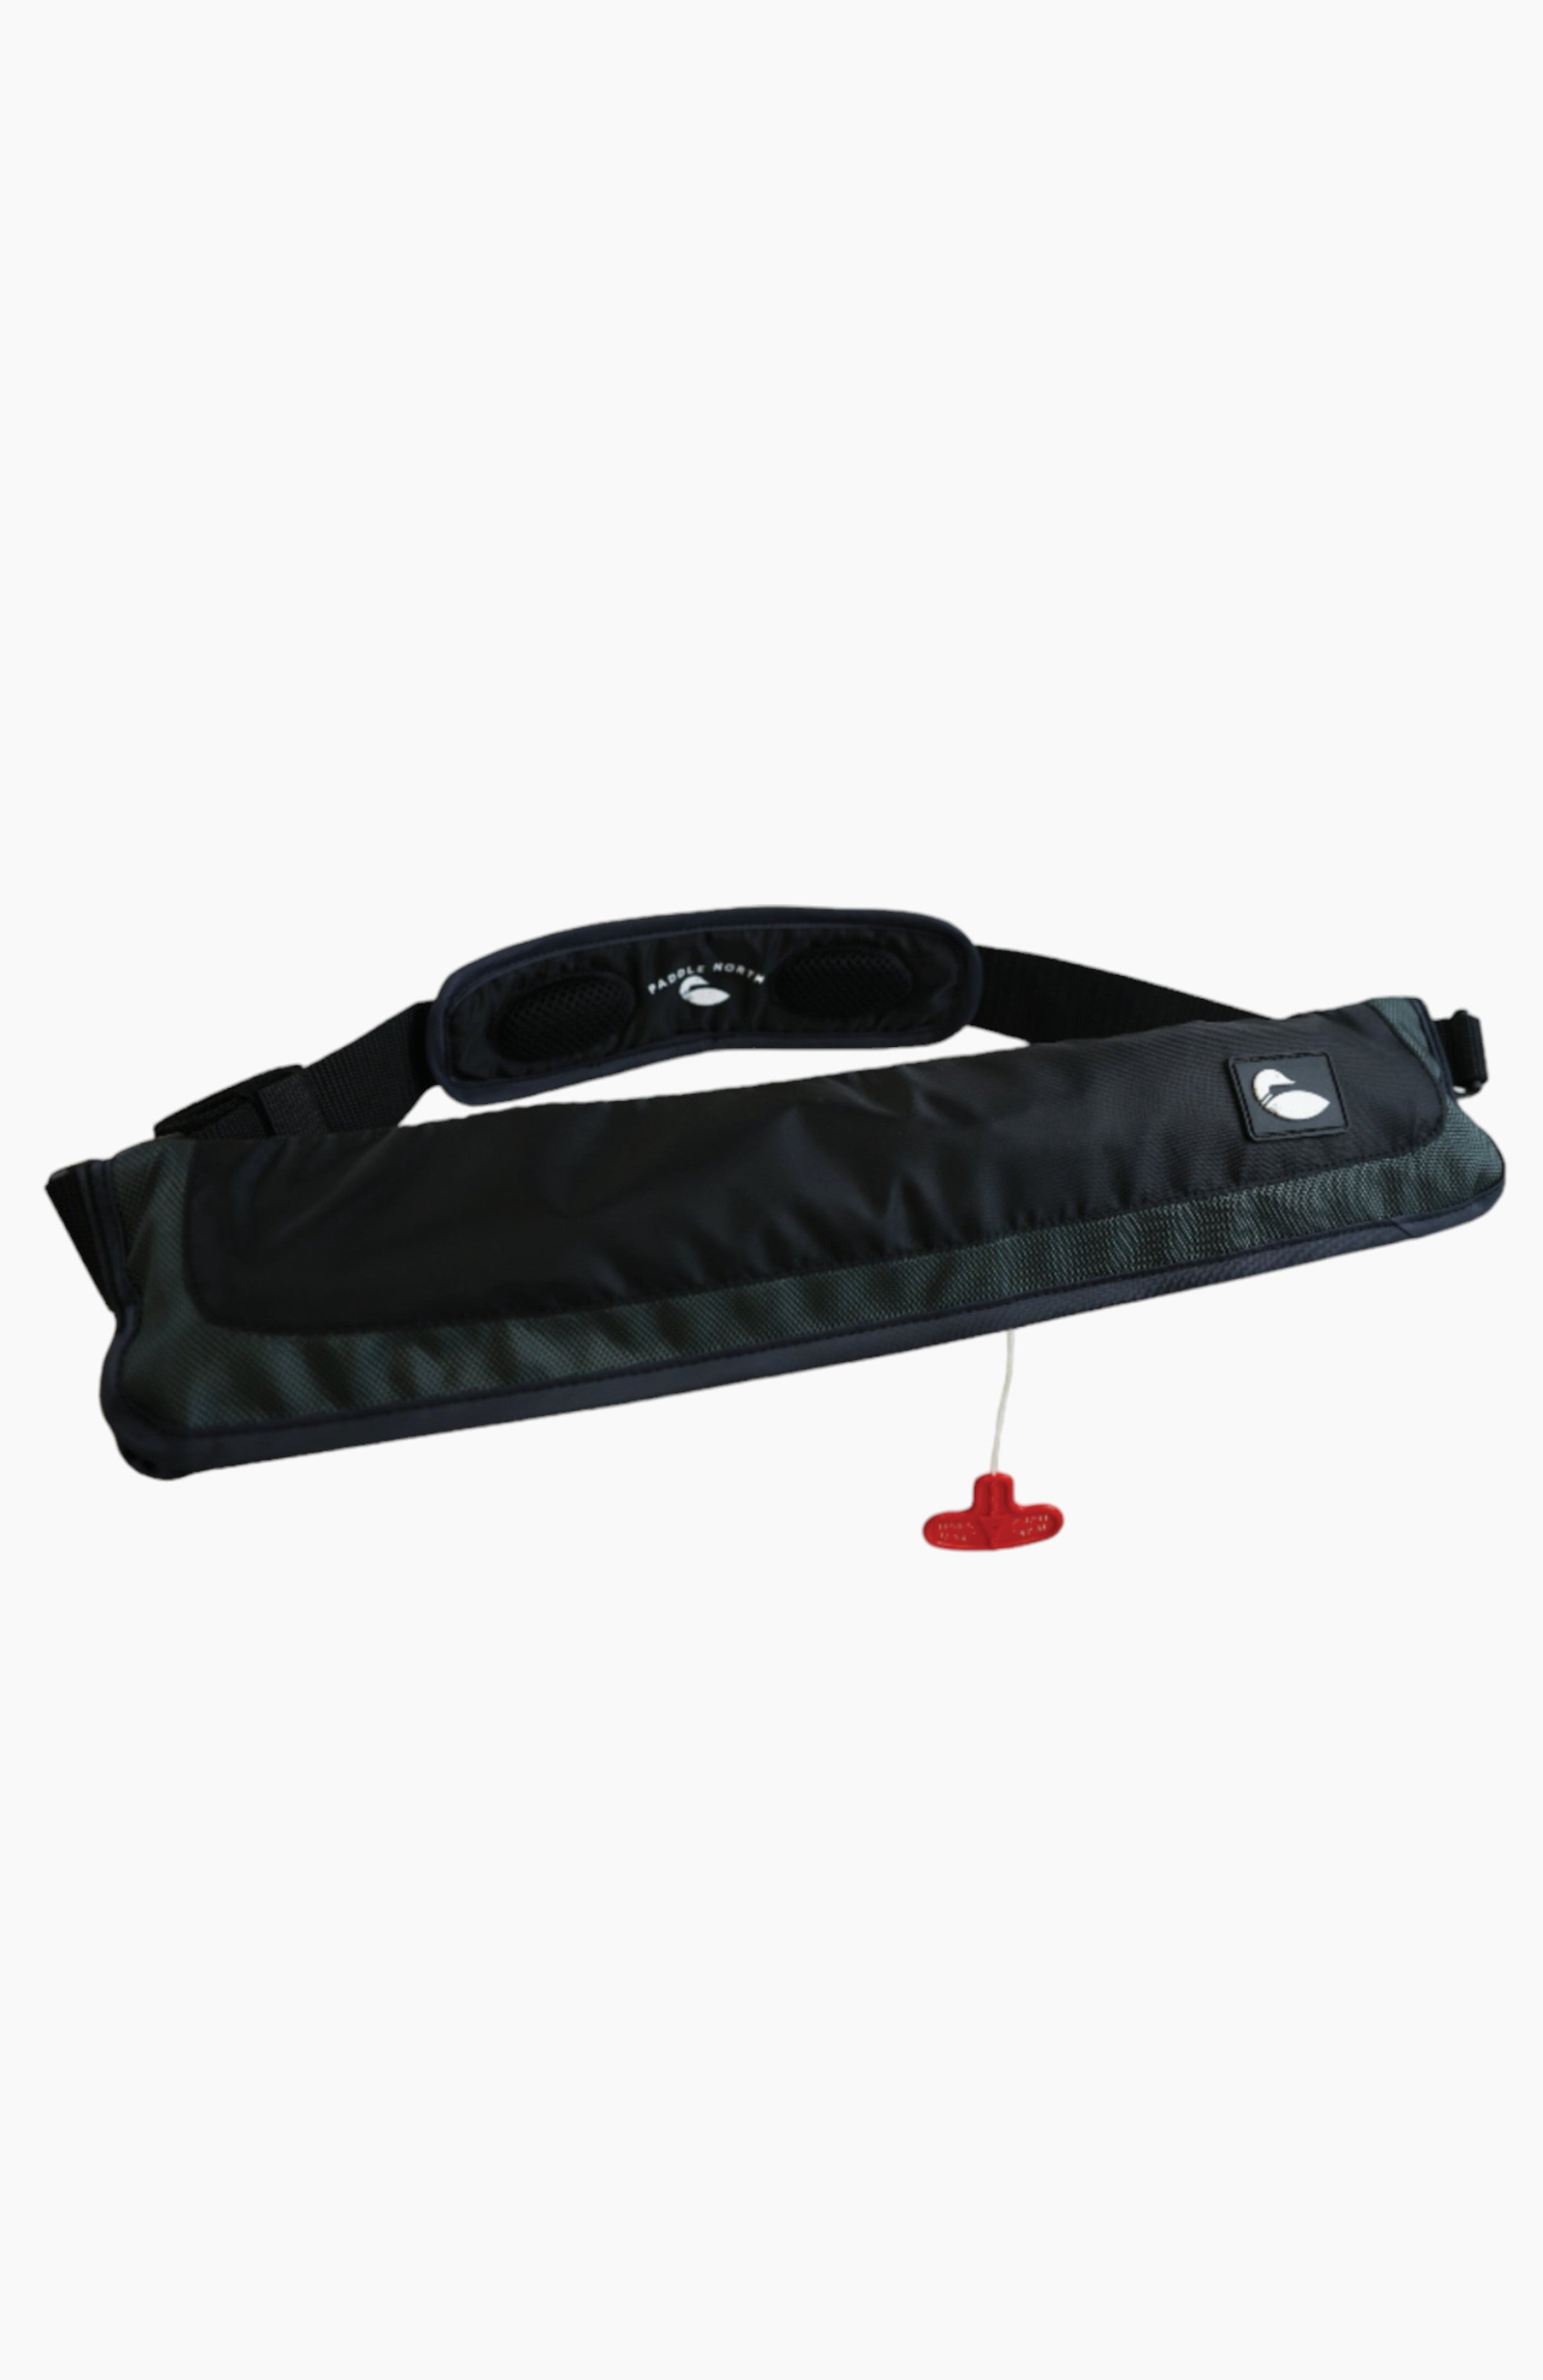 Water accessories: inflatable life jacket stored in a black bag worn like a belt.